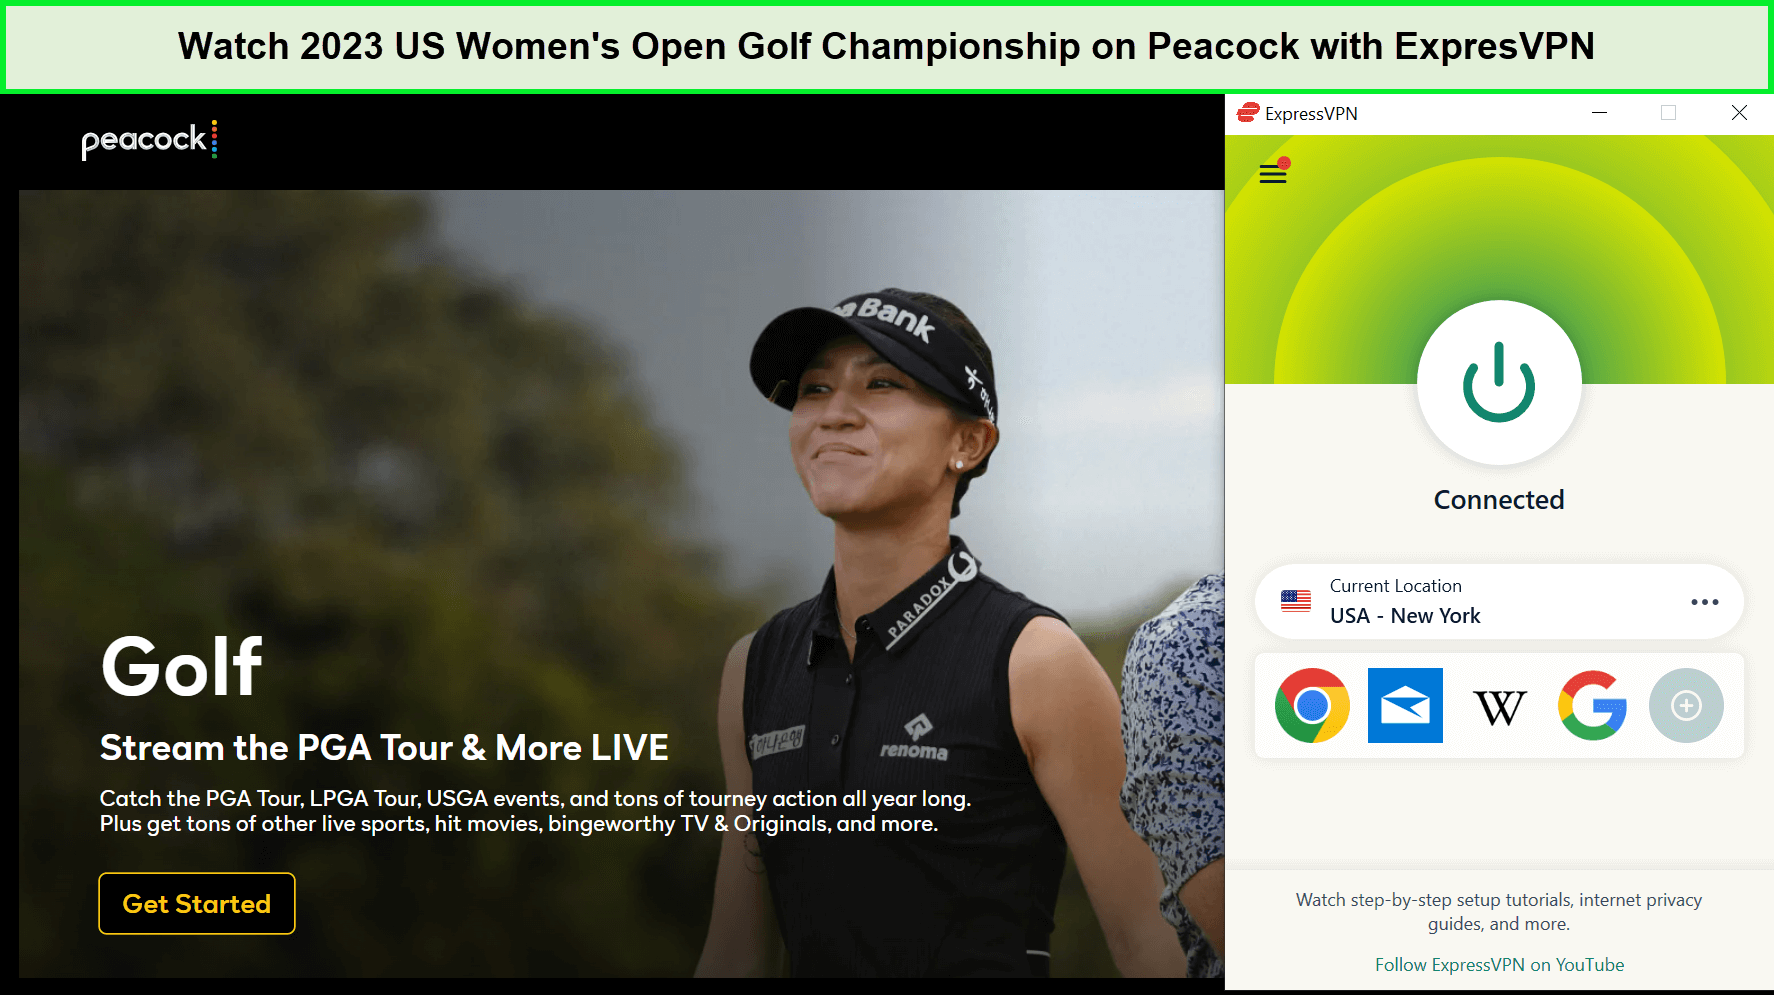 Watch-2023-US-Womens-Open-Golf-Championship-in-UK-on-Peacock-with-ExpresVPN